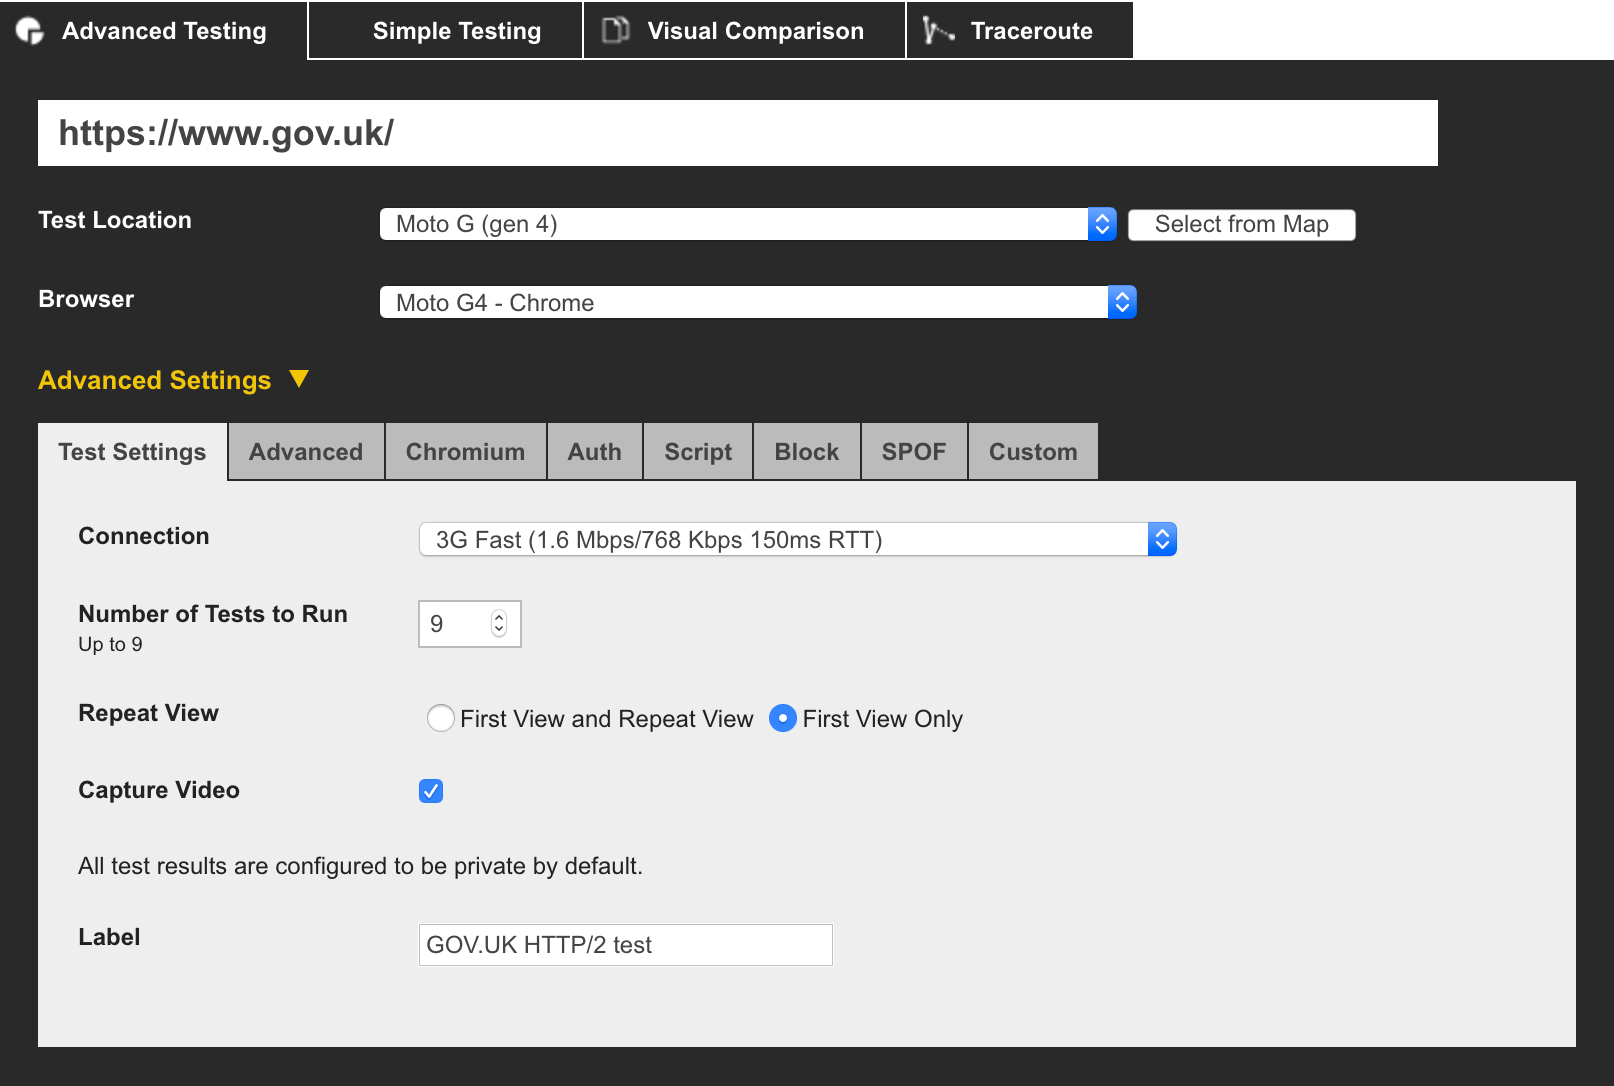 Run the first test, label with HTTP/2 and select your settings.